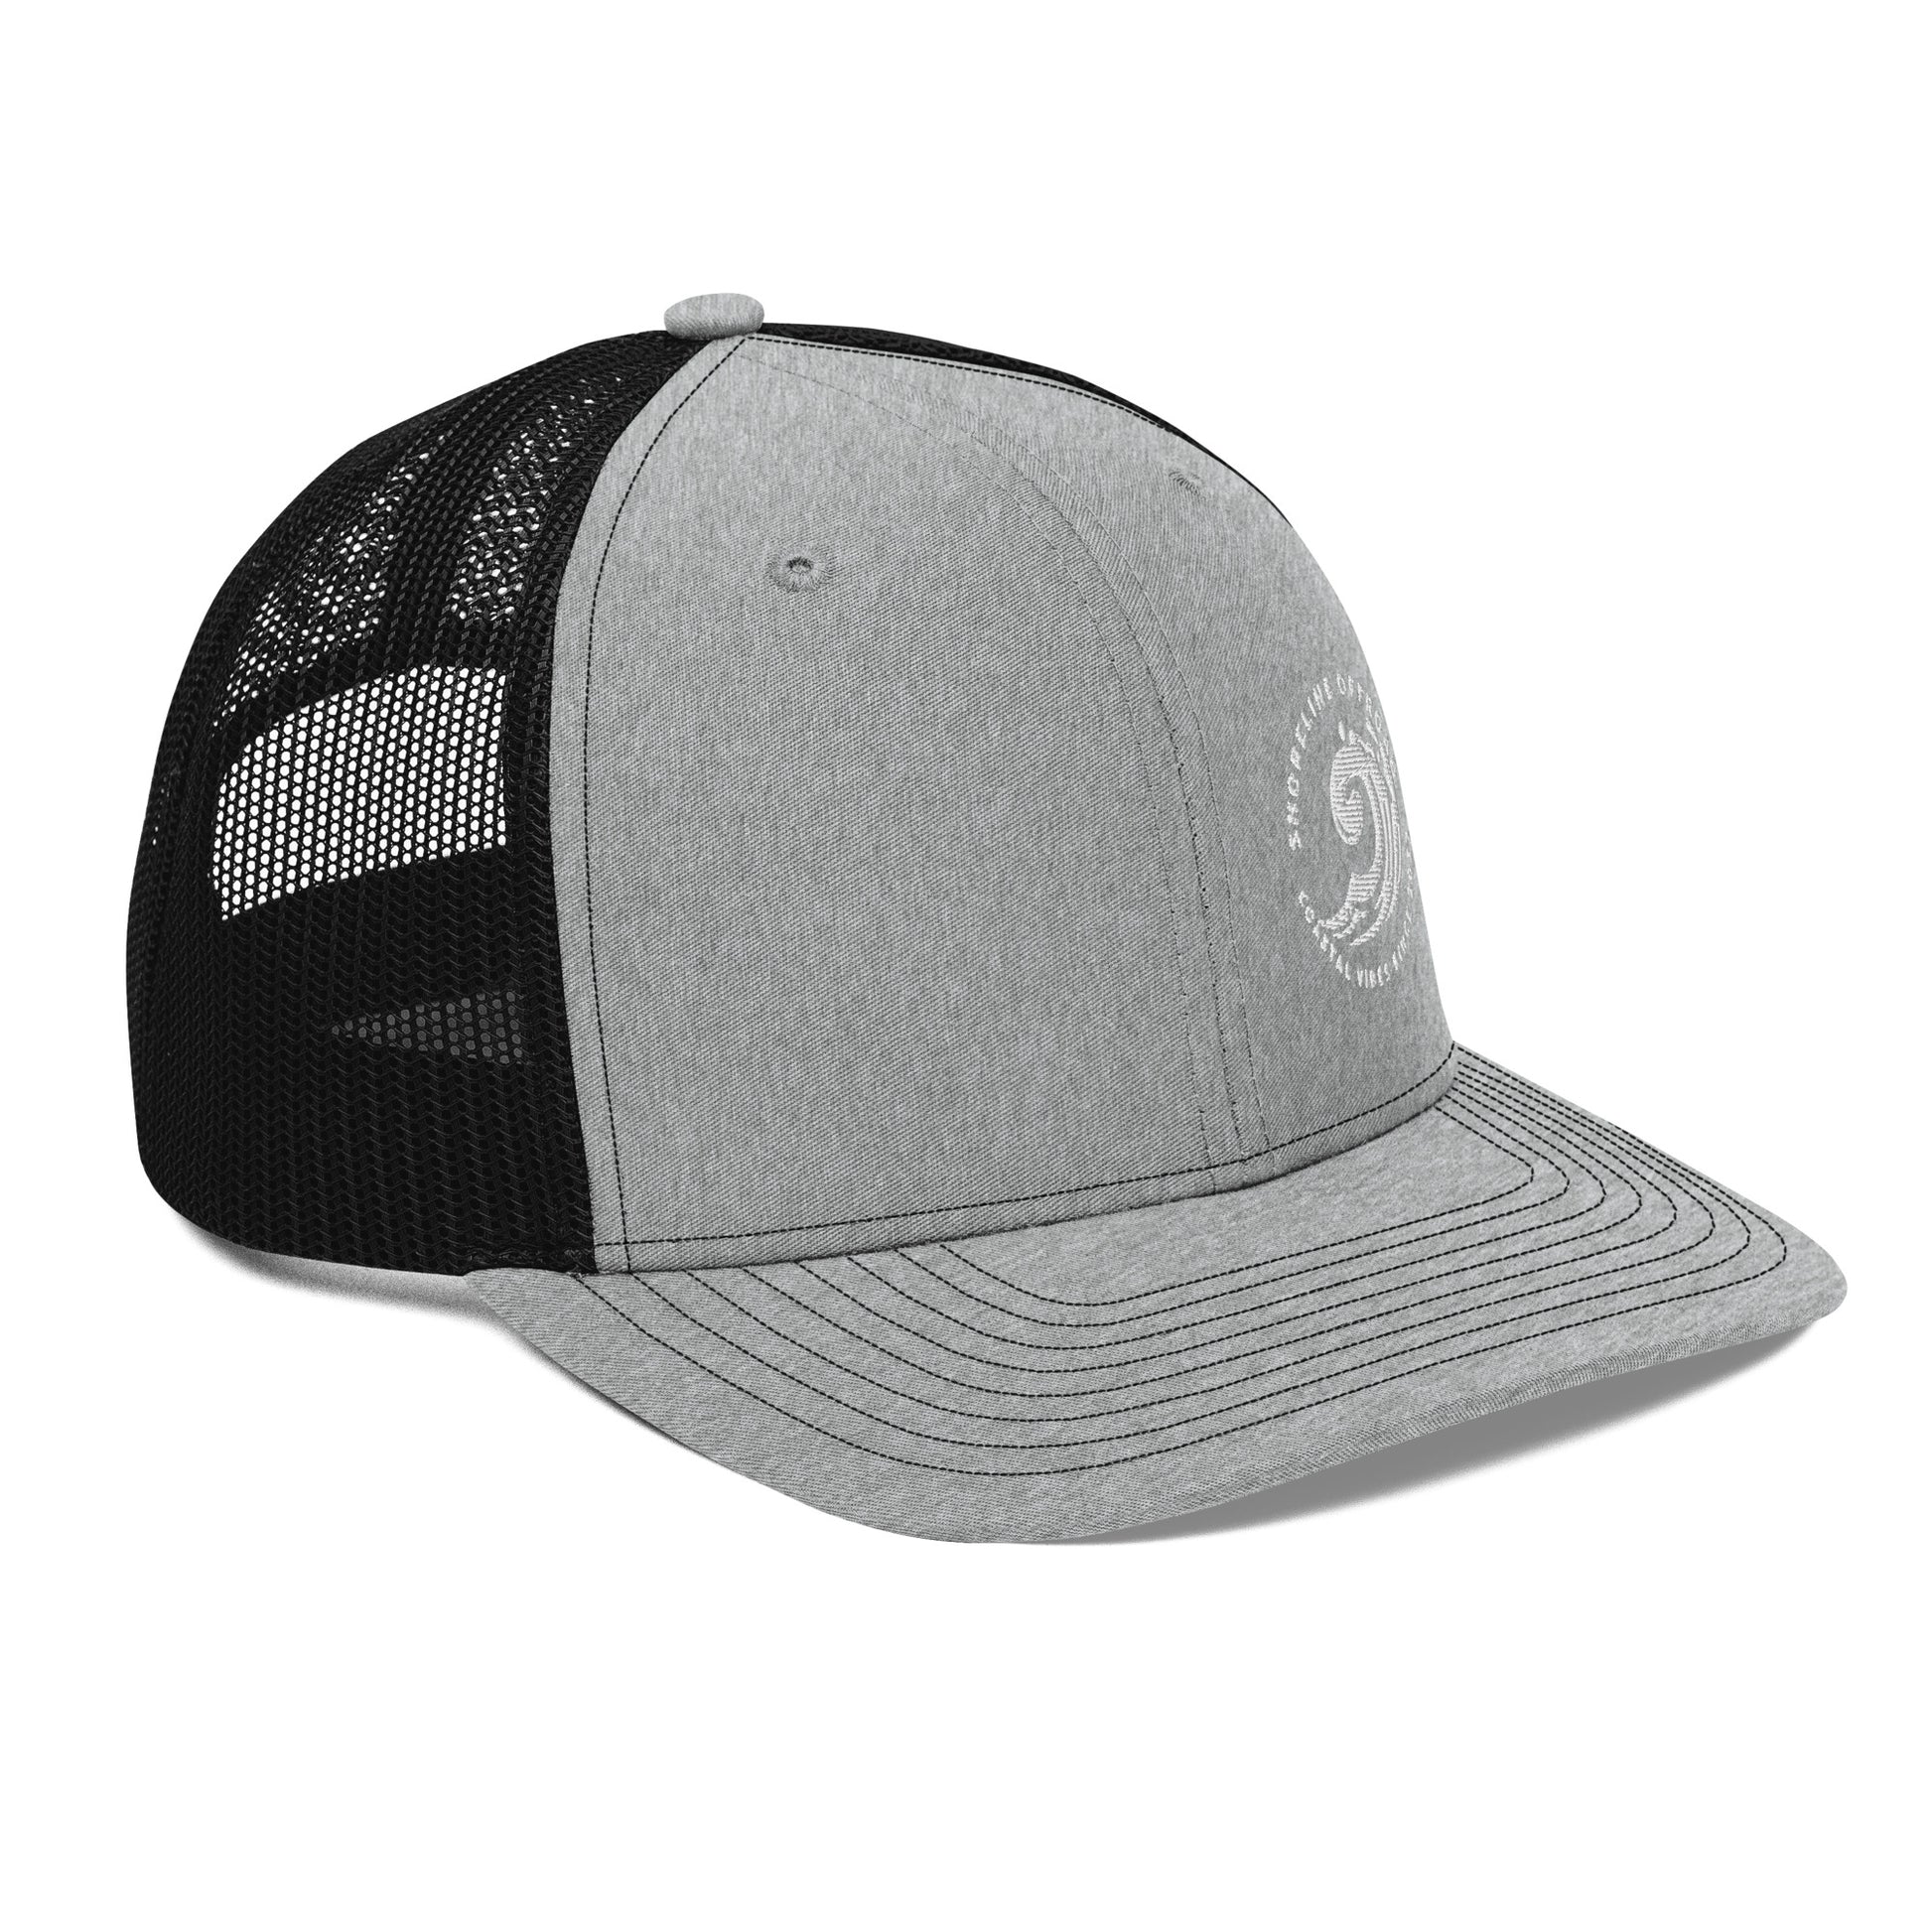 a grey and black hat with a white logo